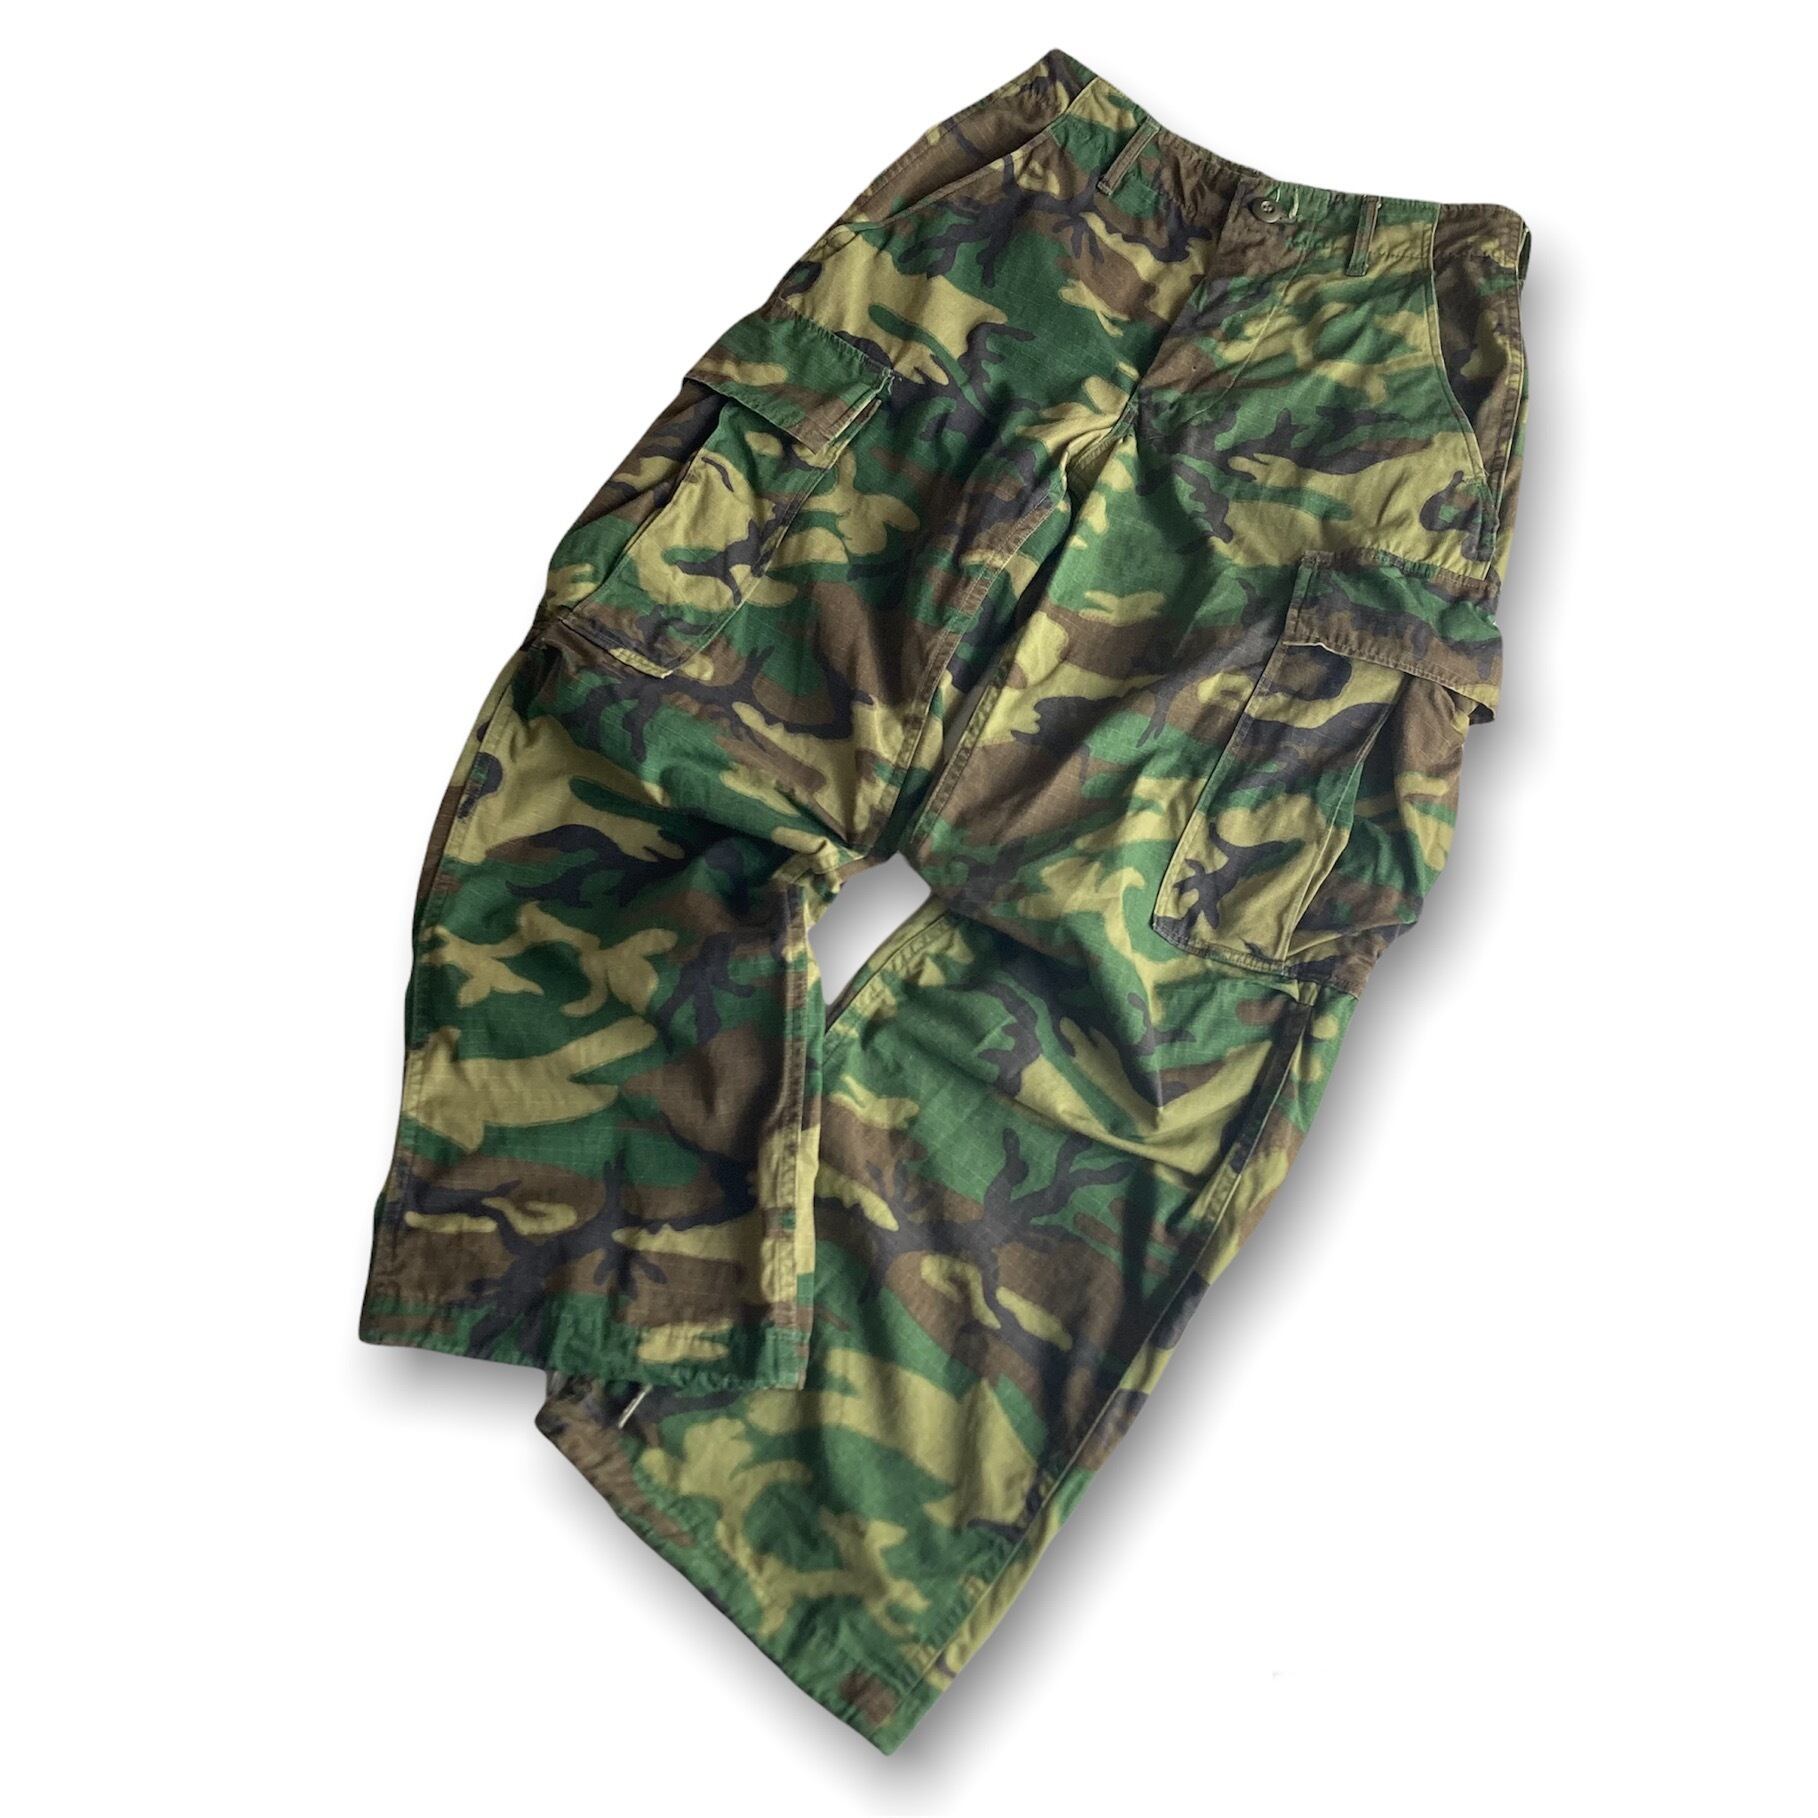 70s 1969 TROUSERS CAMOUFLAGE COTTON POPLIN RIP STOP